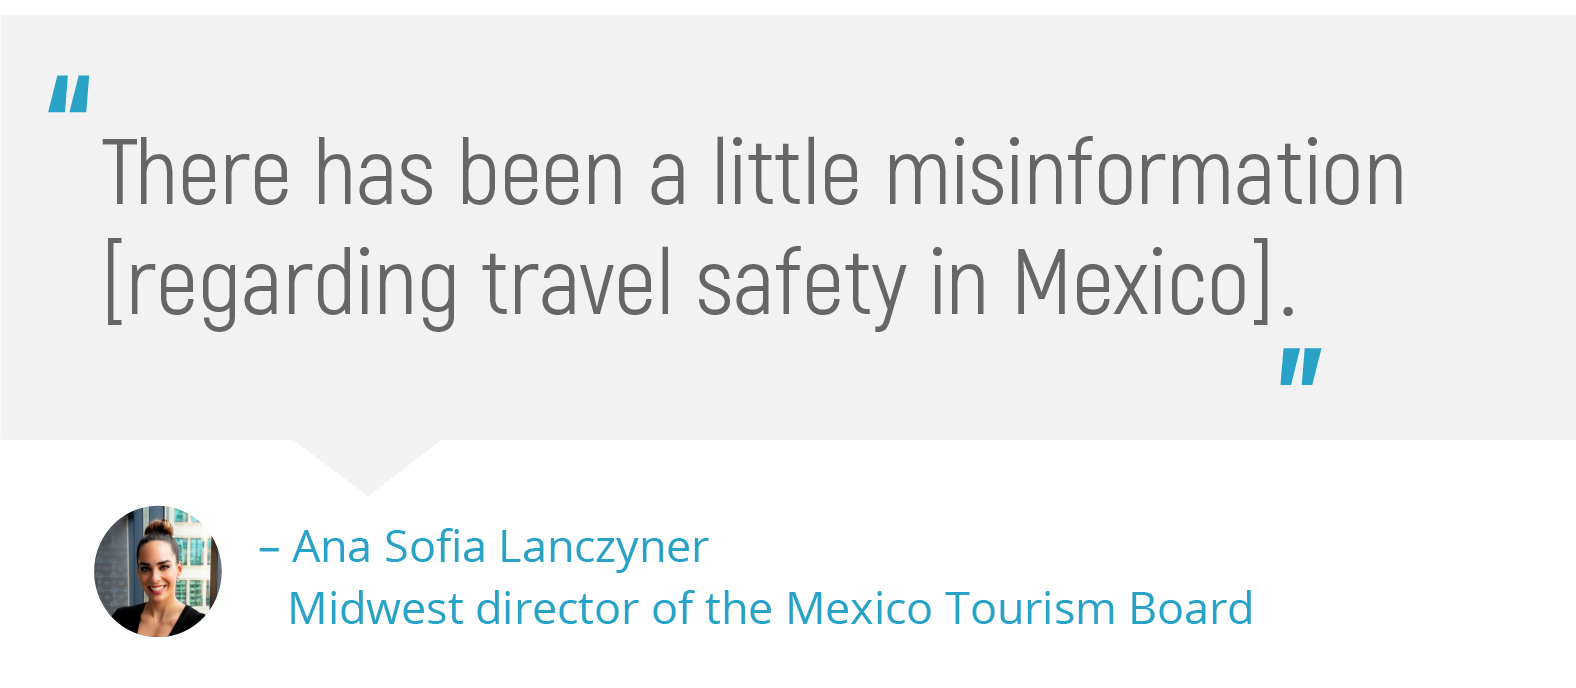 "There has been a little misinformation [regarding travel safety in Mexico]."